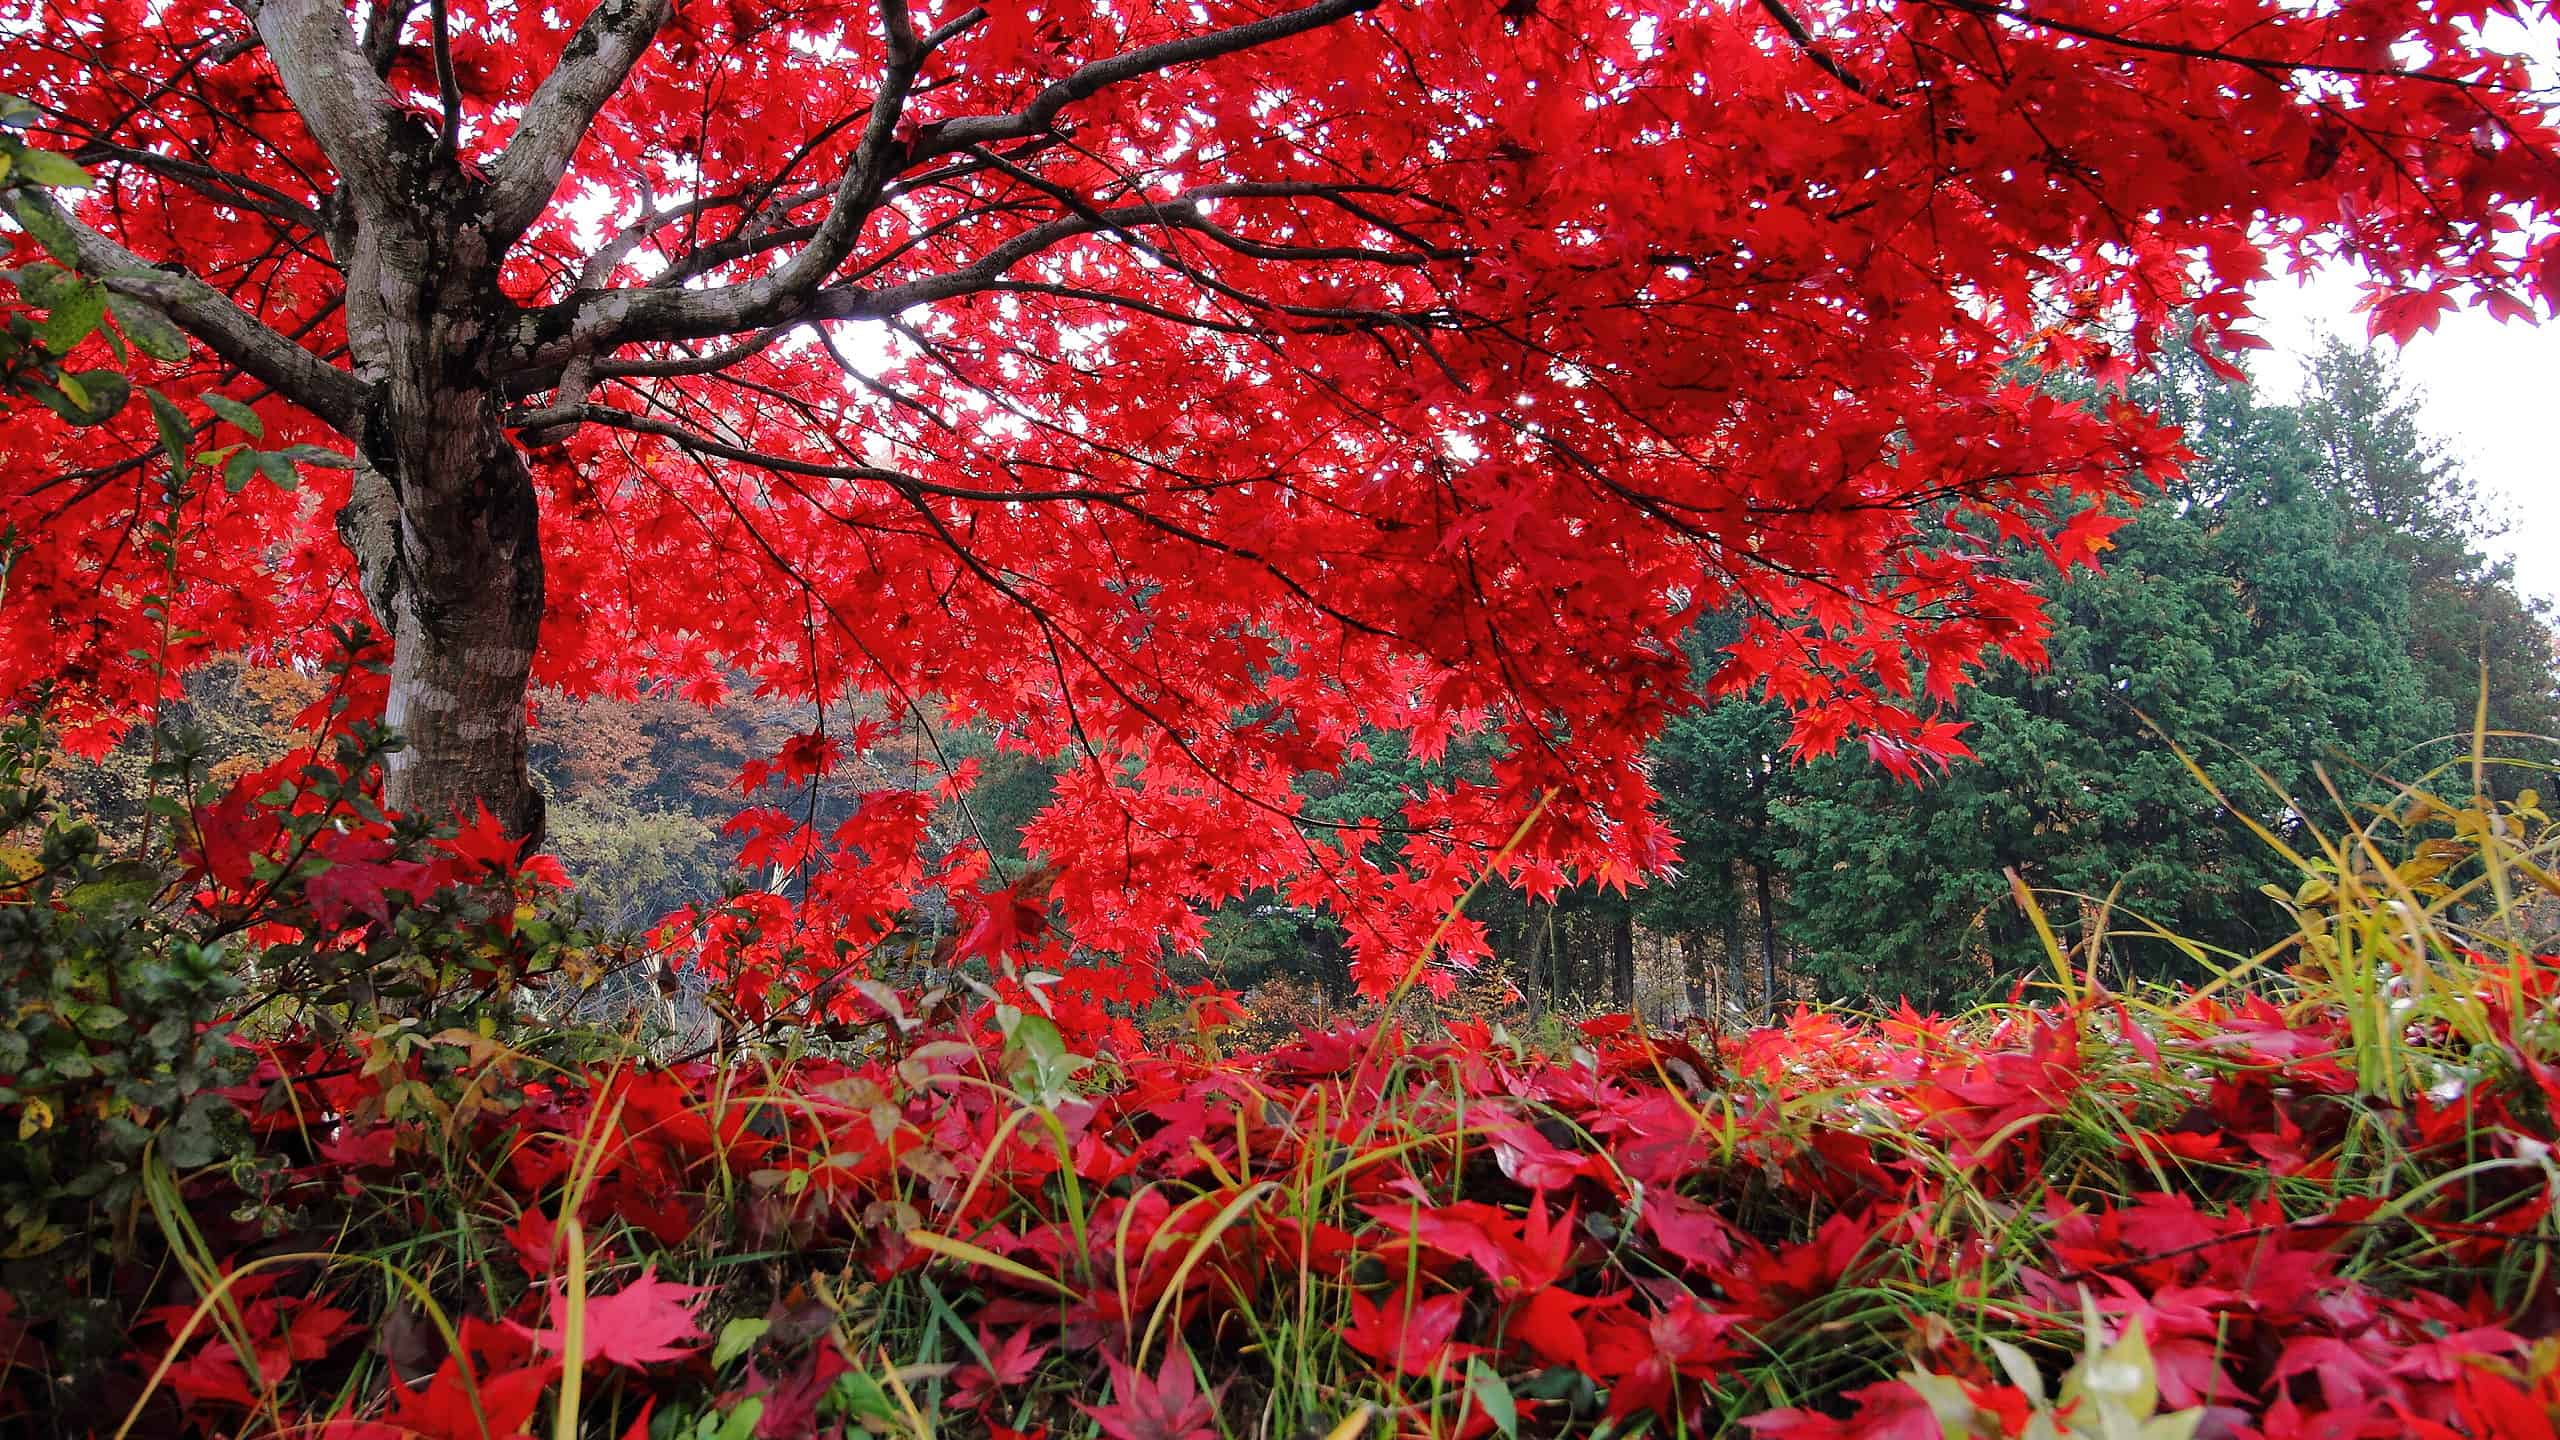 The red maple tree was spread branch gracefully in autumn.